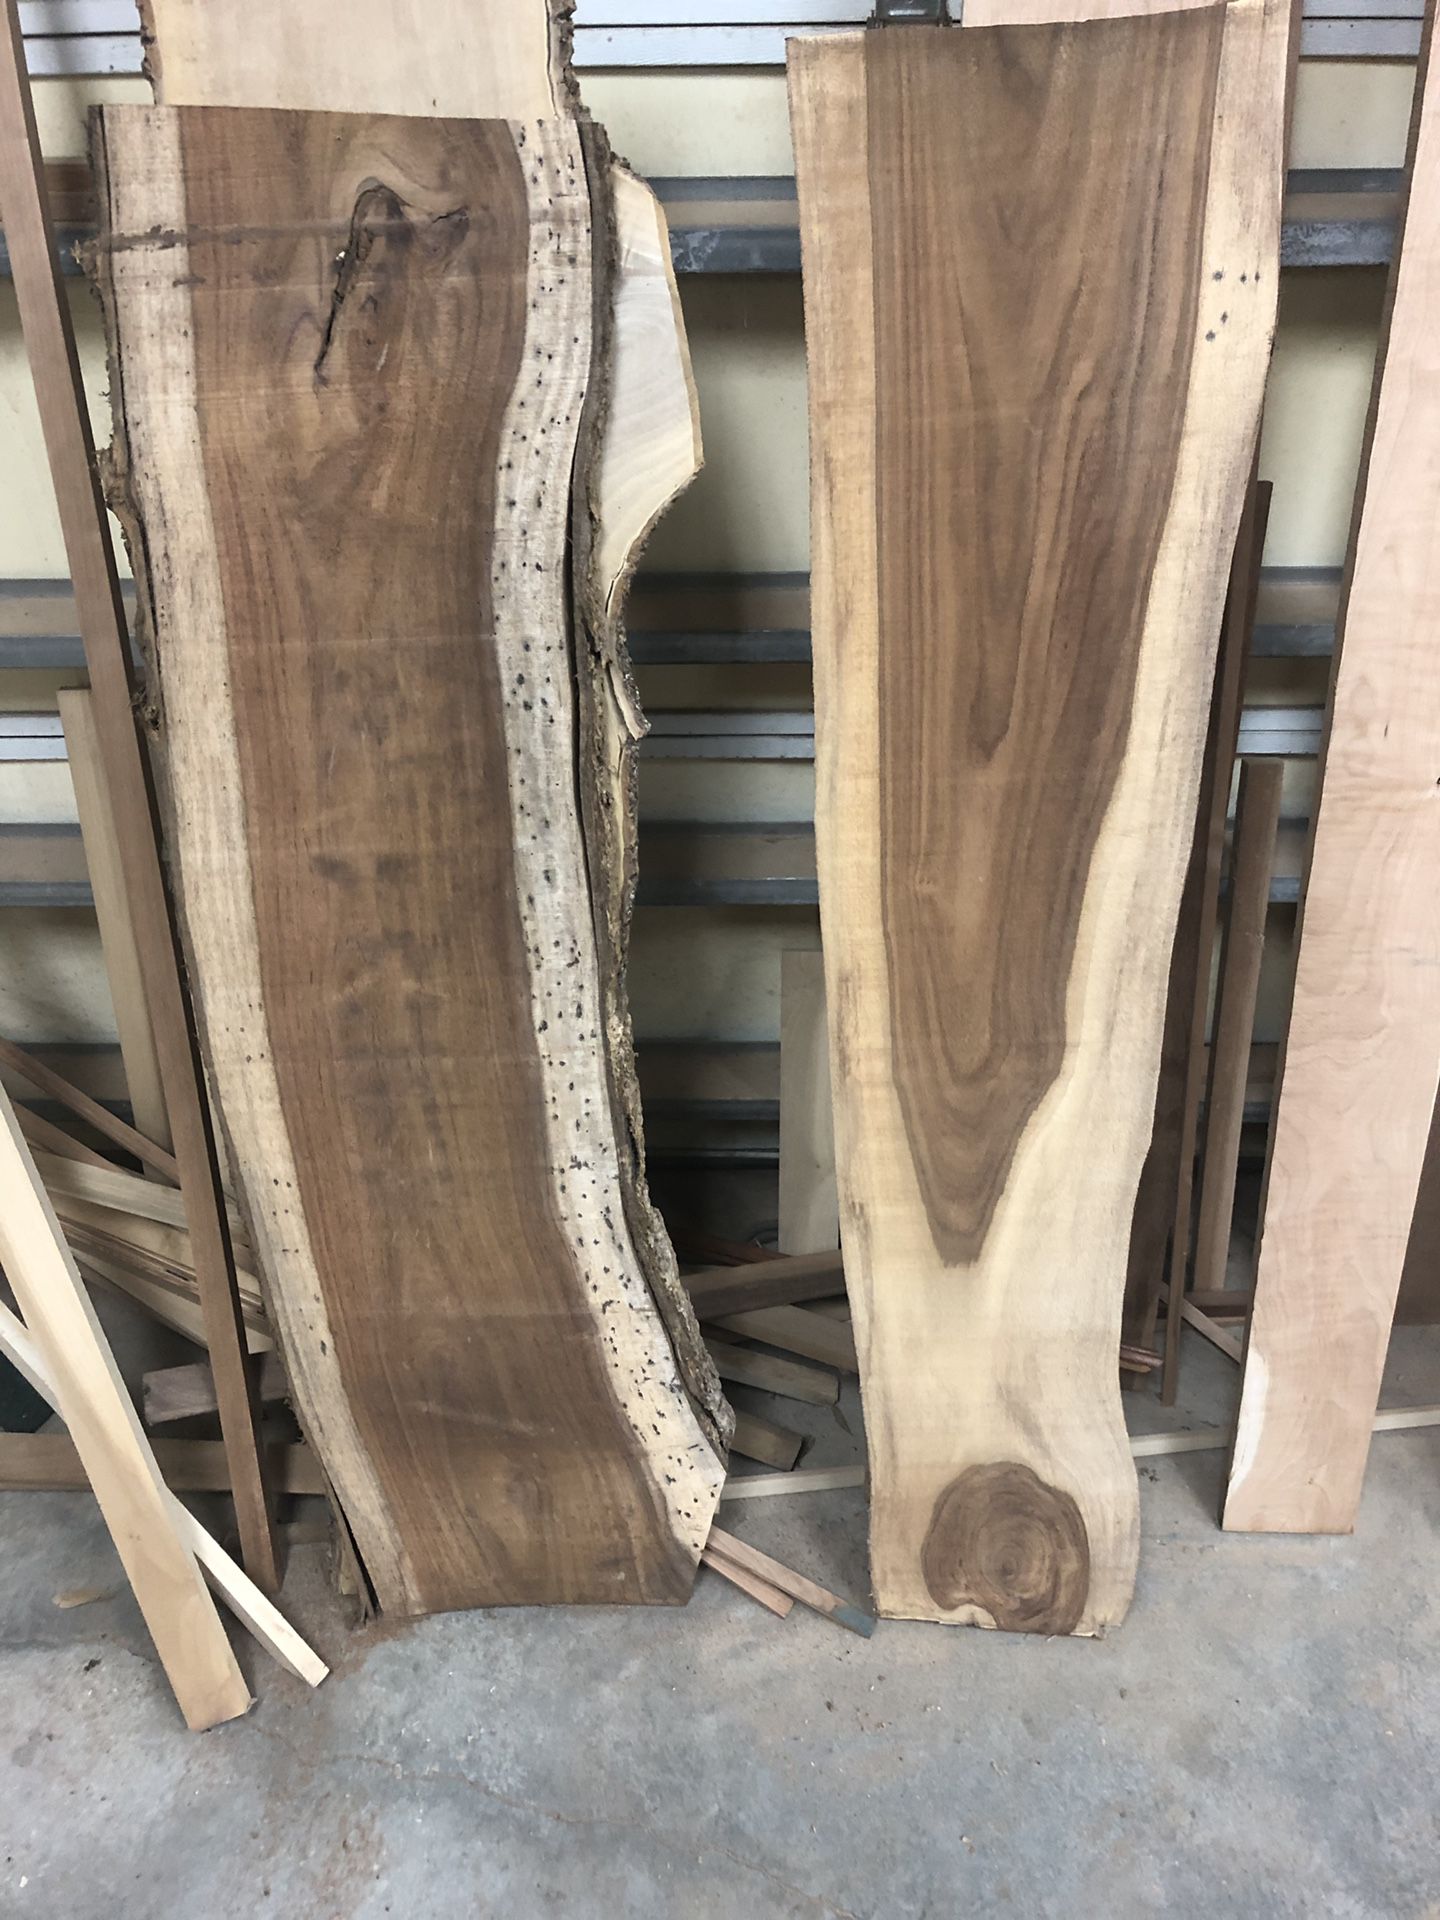 Rosewood and sycamore slabs